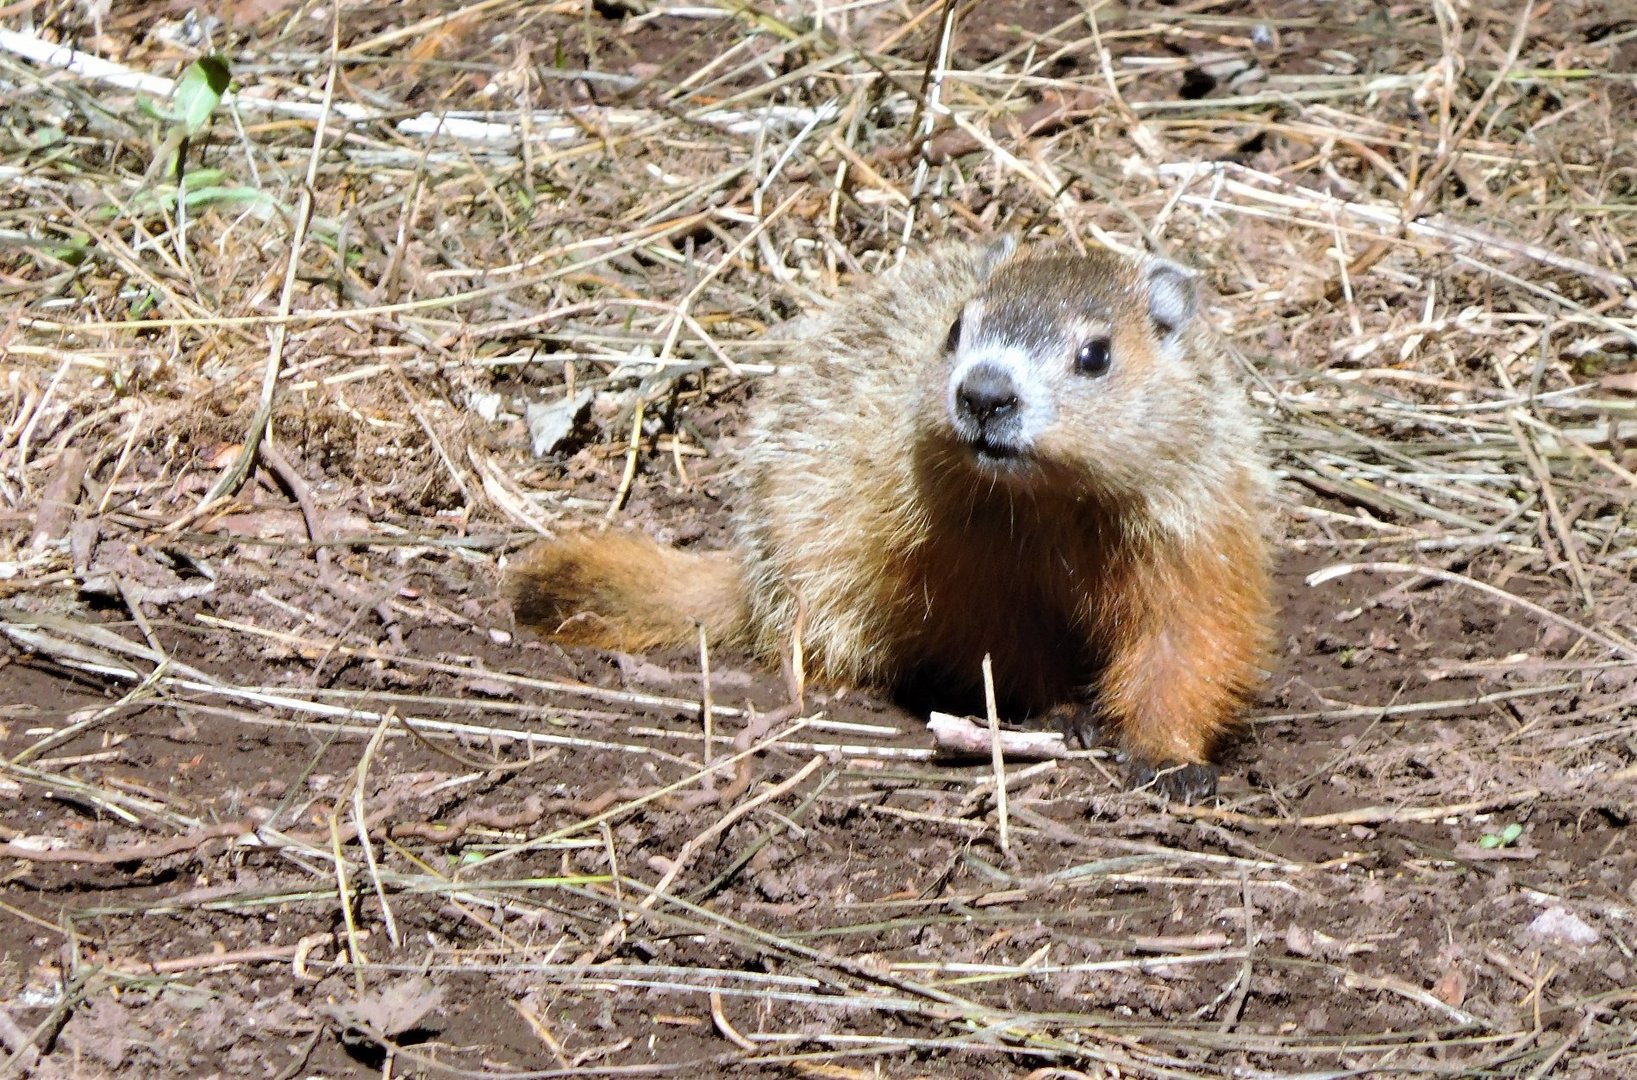 image Canadian groundhog Fred la marmotte found dead before Groundhog Day